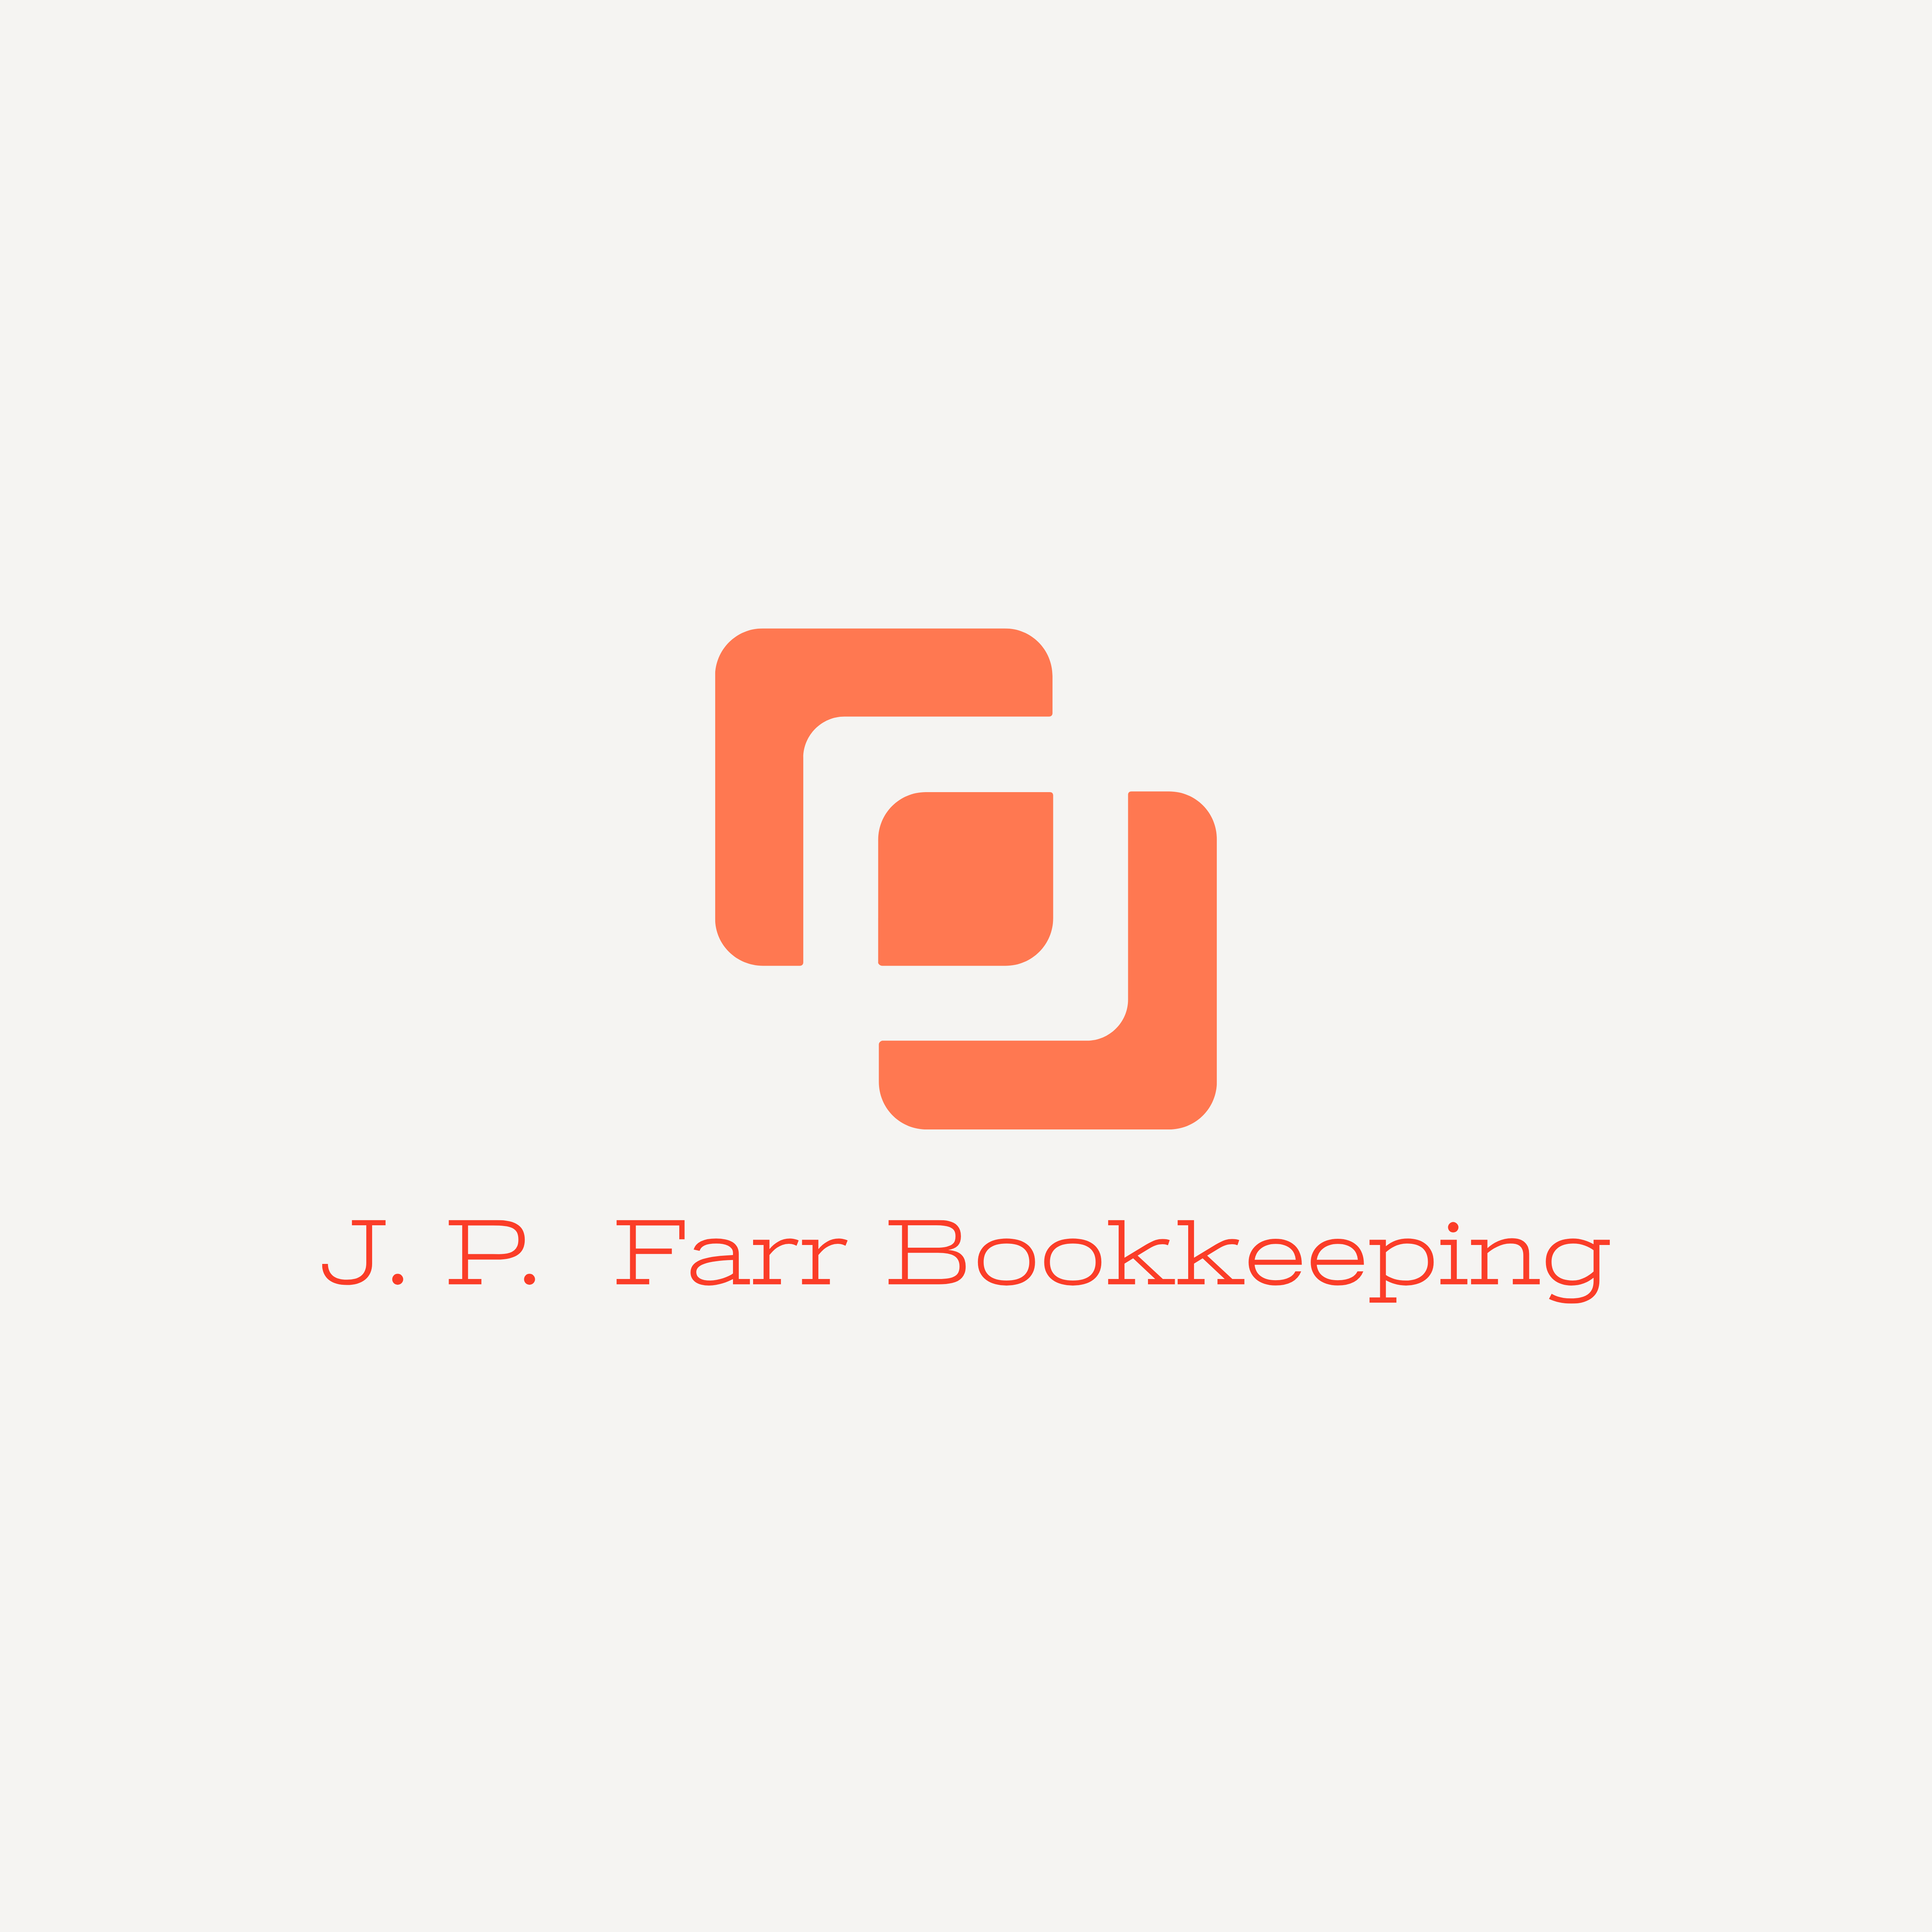 Logo of J P Farr Bookkeeping Bookkeeping And Accountants In Wellingborough, Northamptonshire